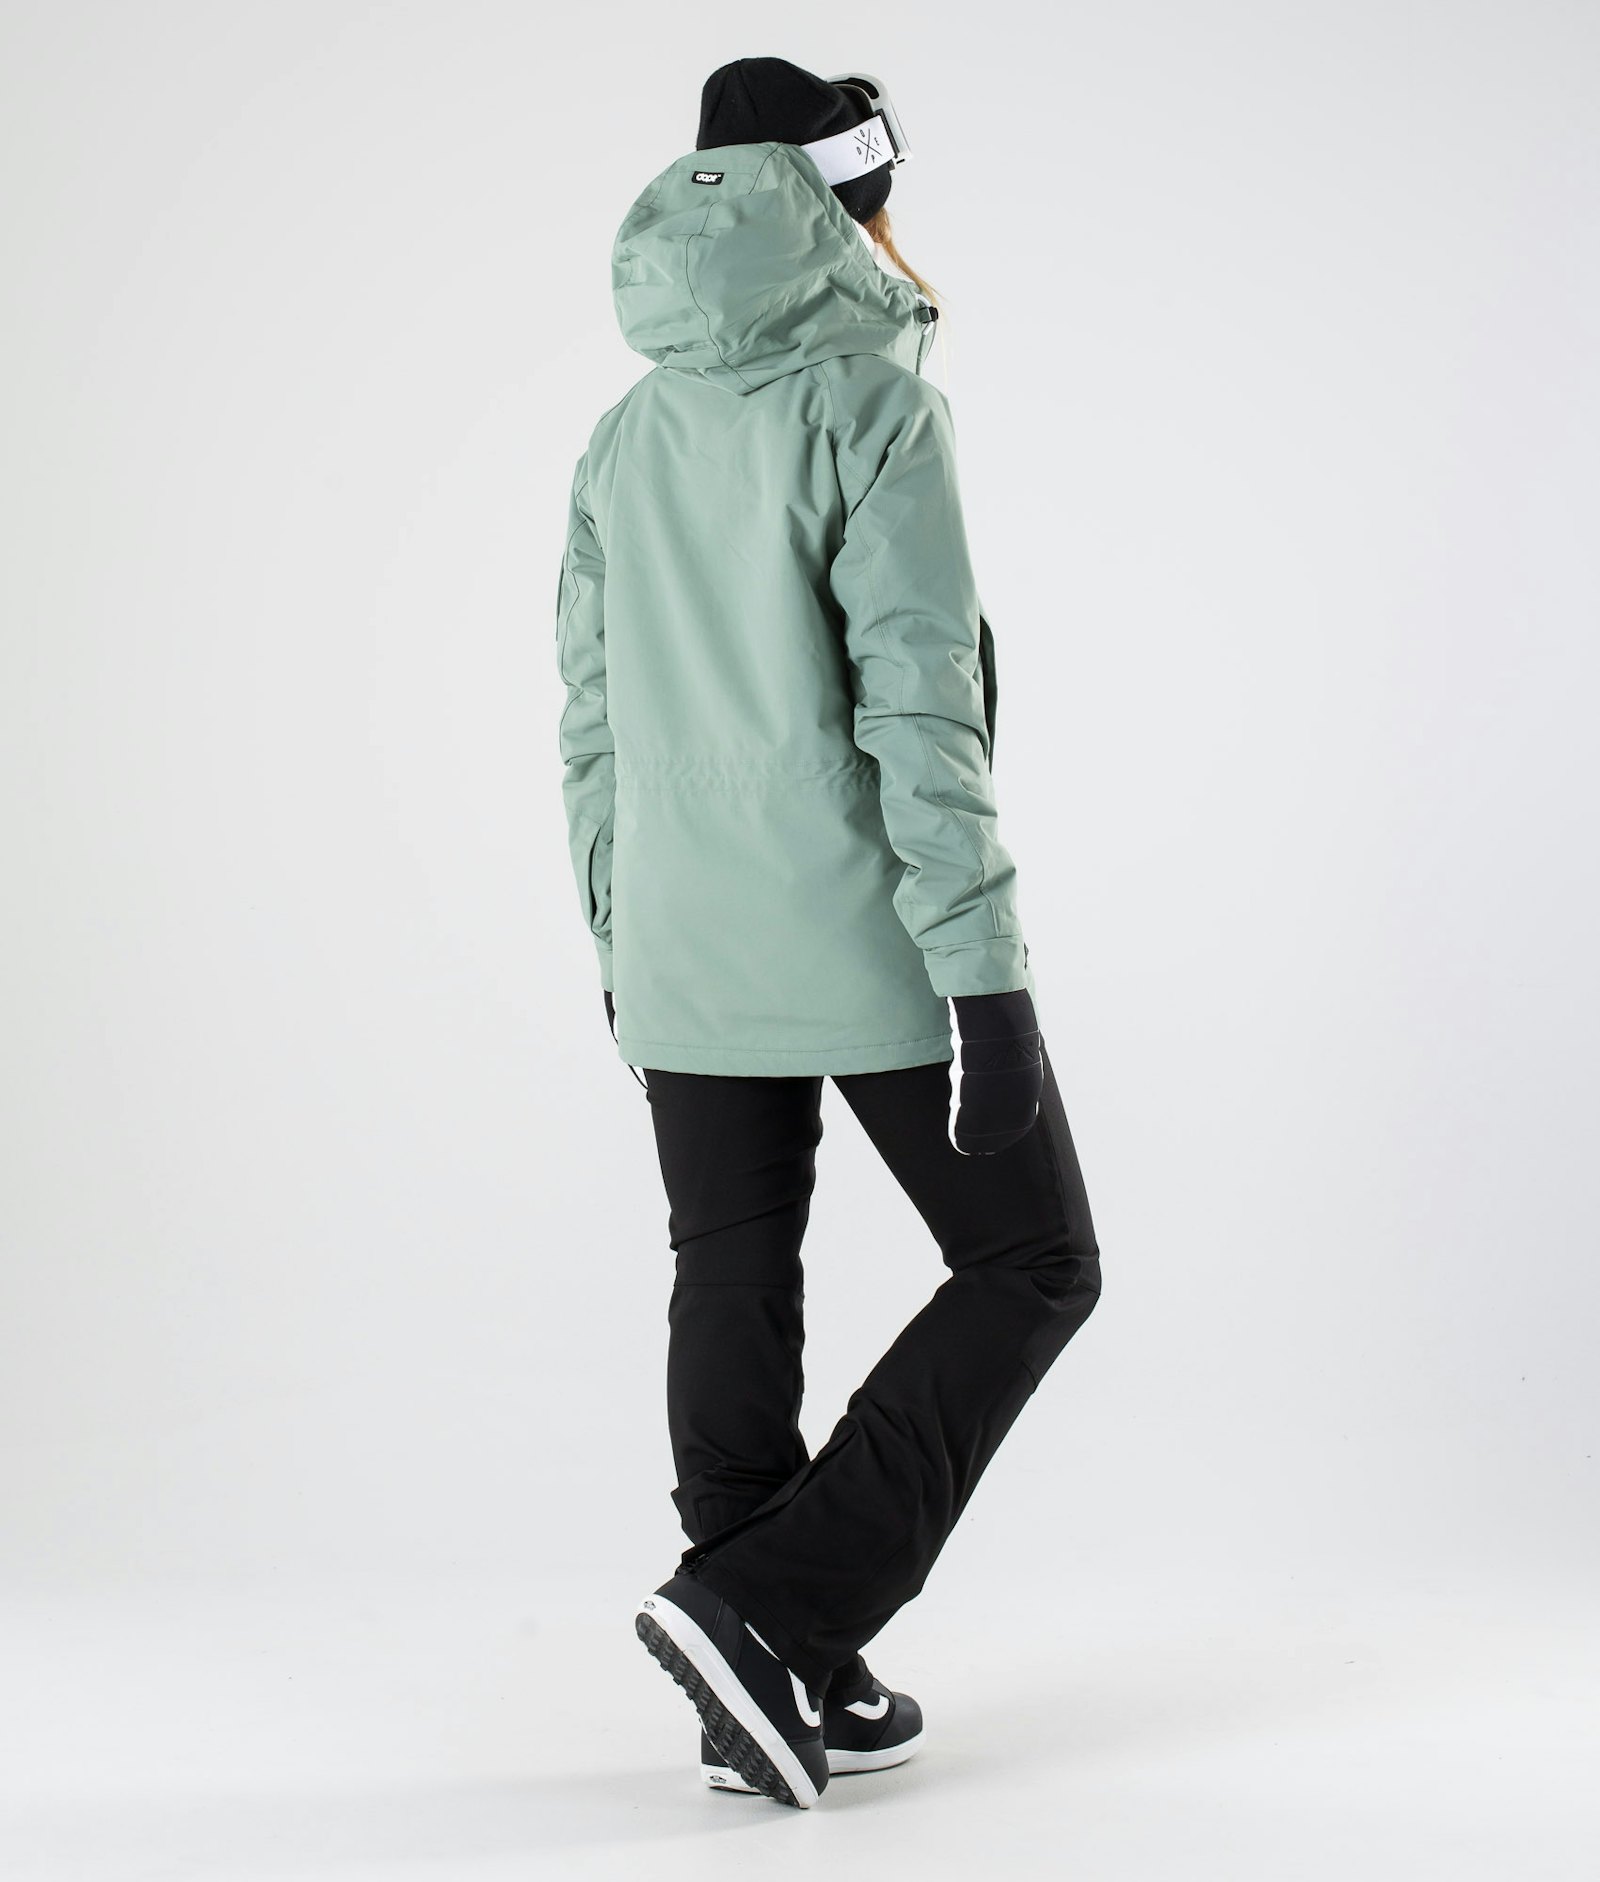 Annok W 2019 Giacca Snowboard Donna Faded Green